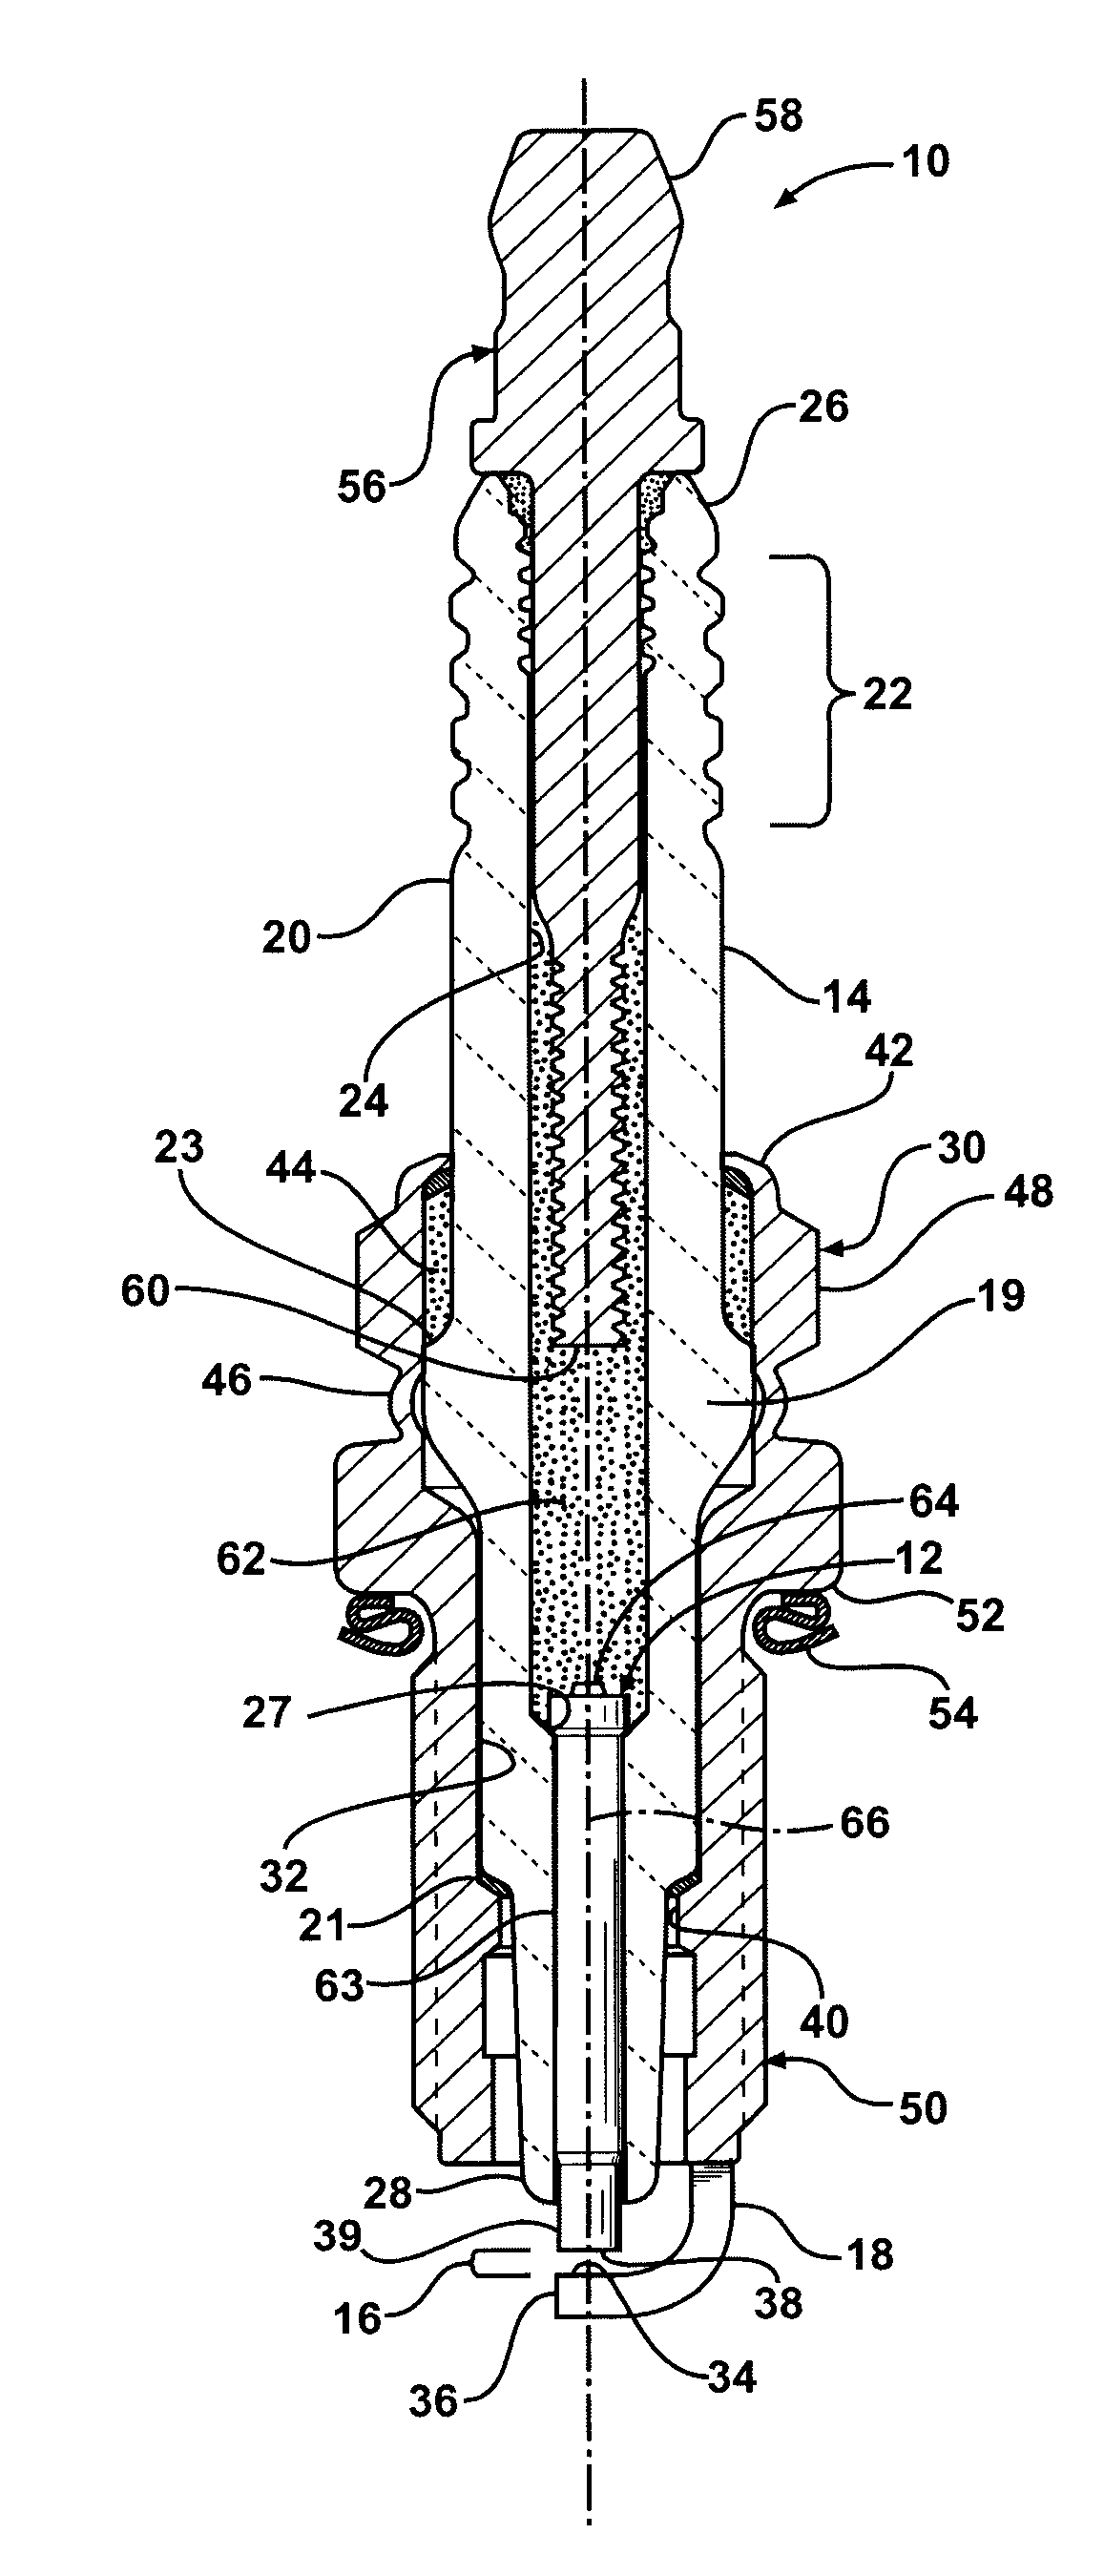 Composite ceramic electrode, ignition device therewith and methods of construction thereof